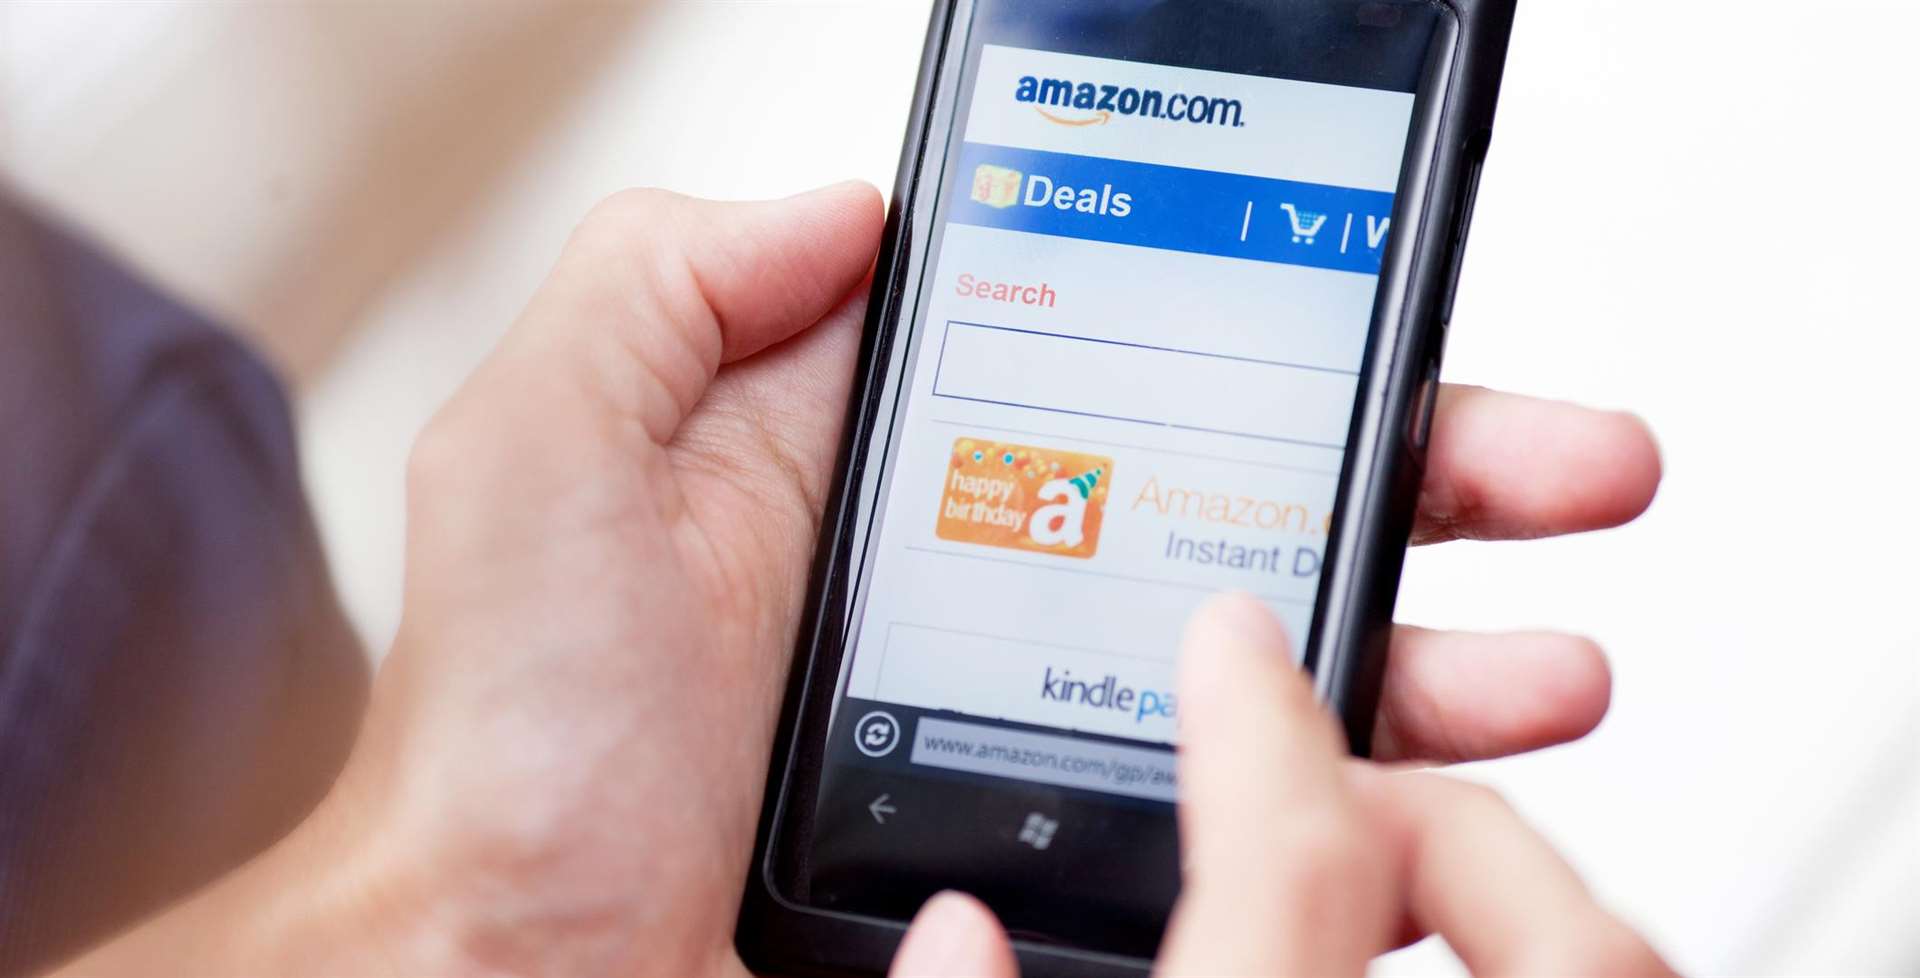 Amazon shoppers can keep tabs on any items of interest by adding them to a Watching List